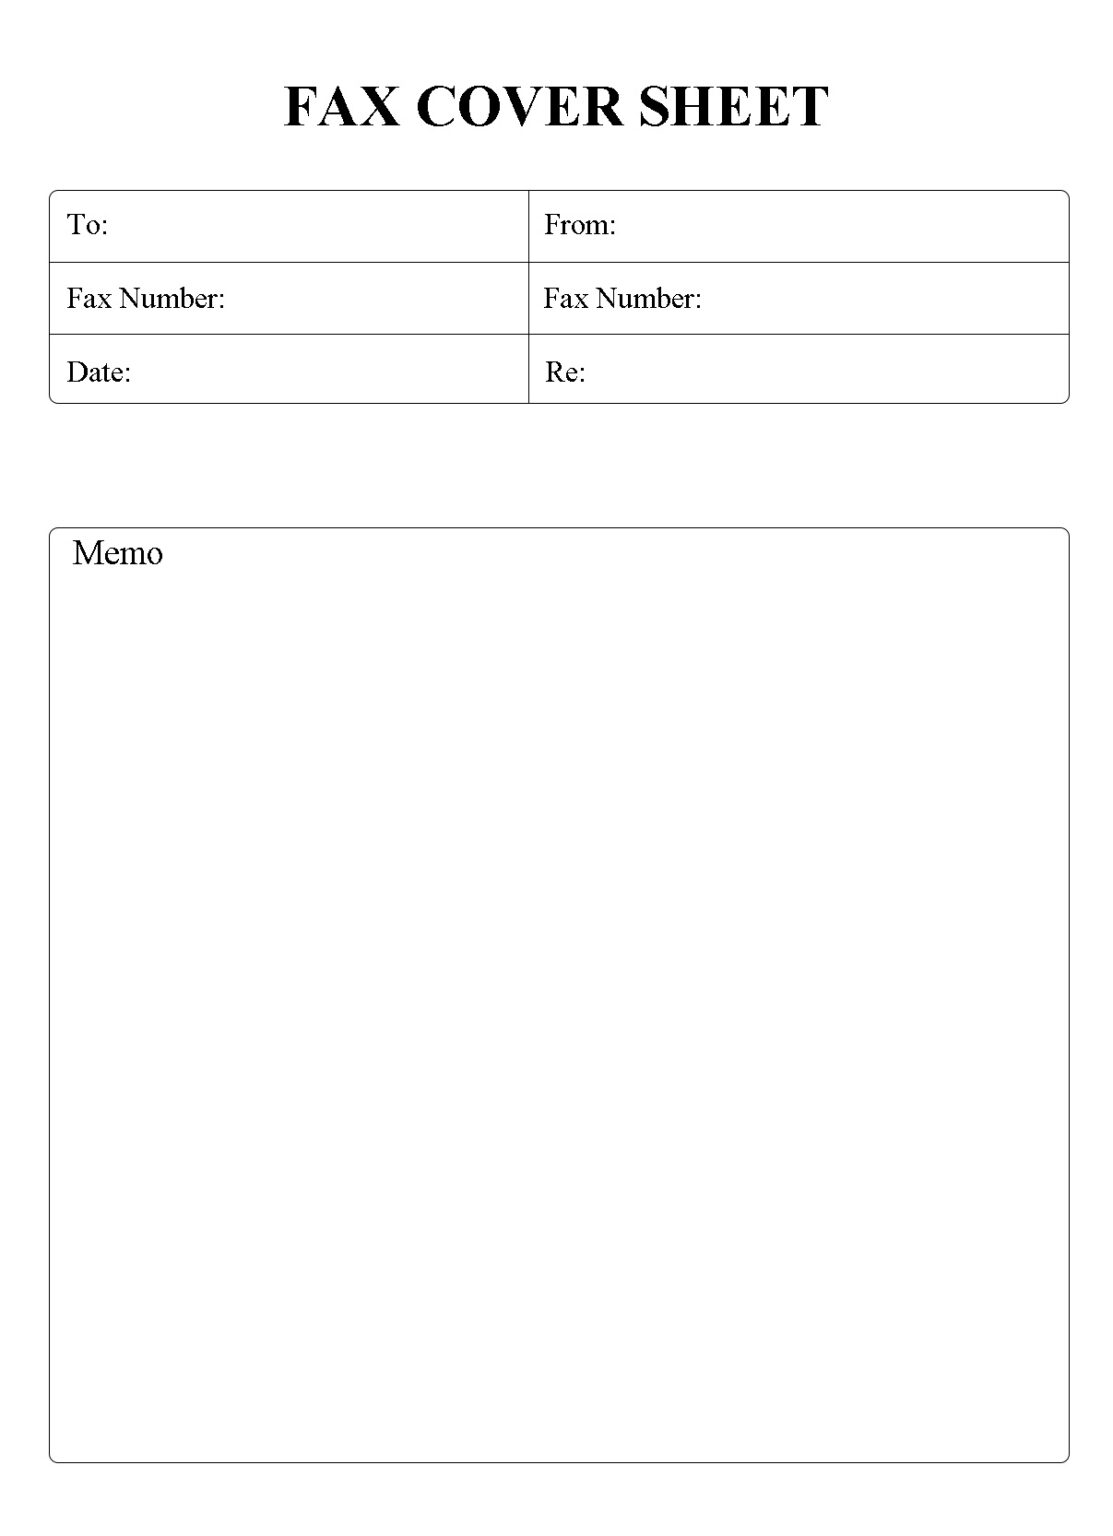 irs-fax-cover-page-free-fax-cover-sheet-template